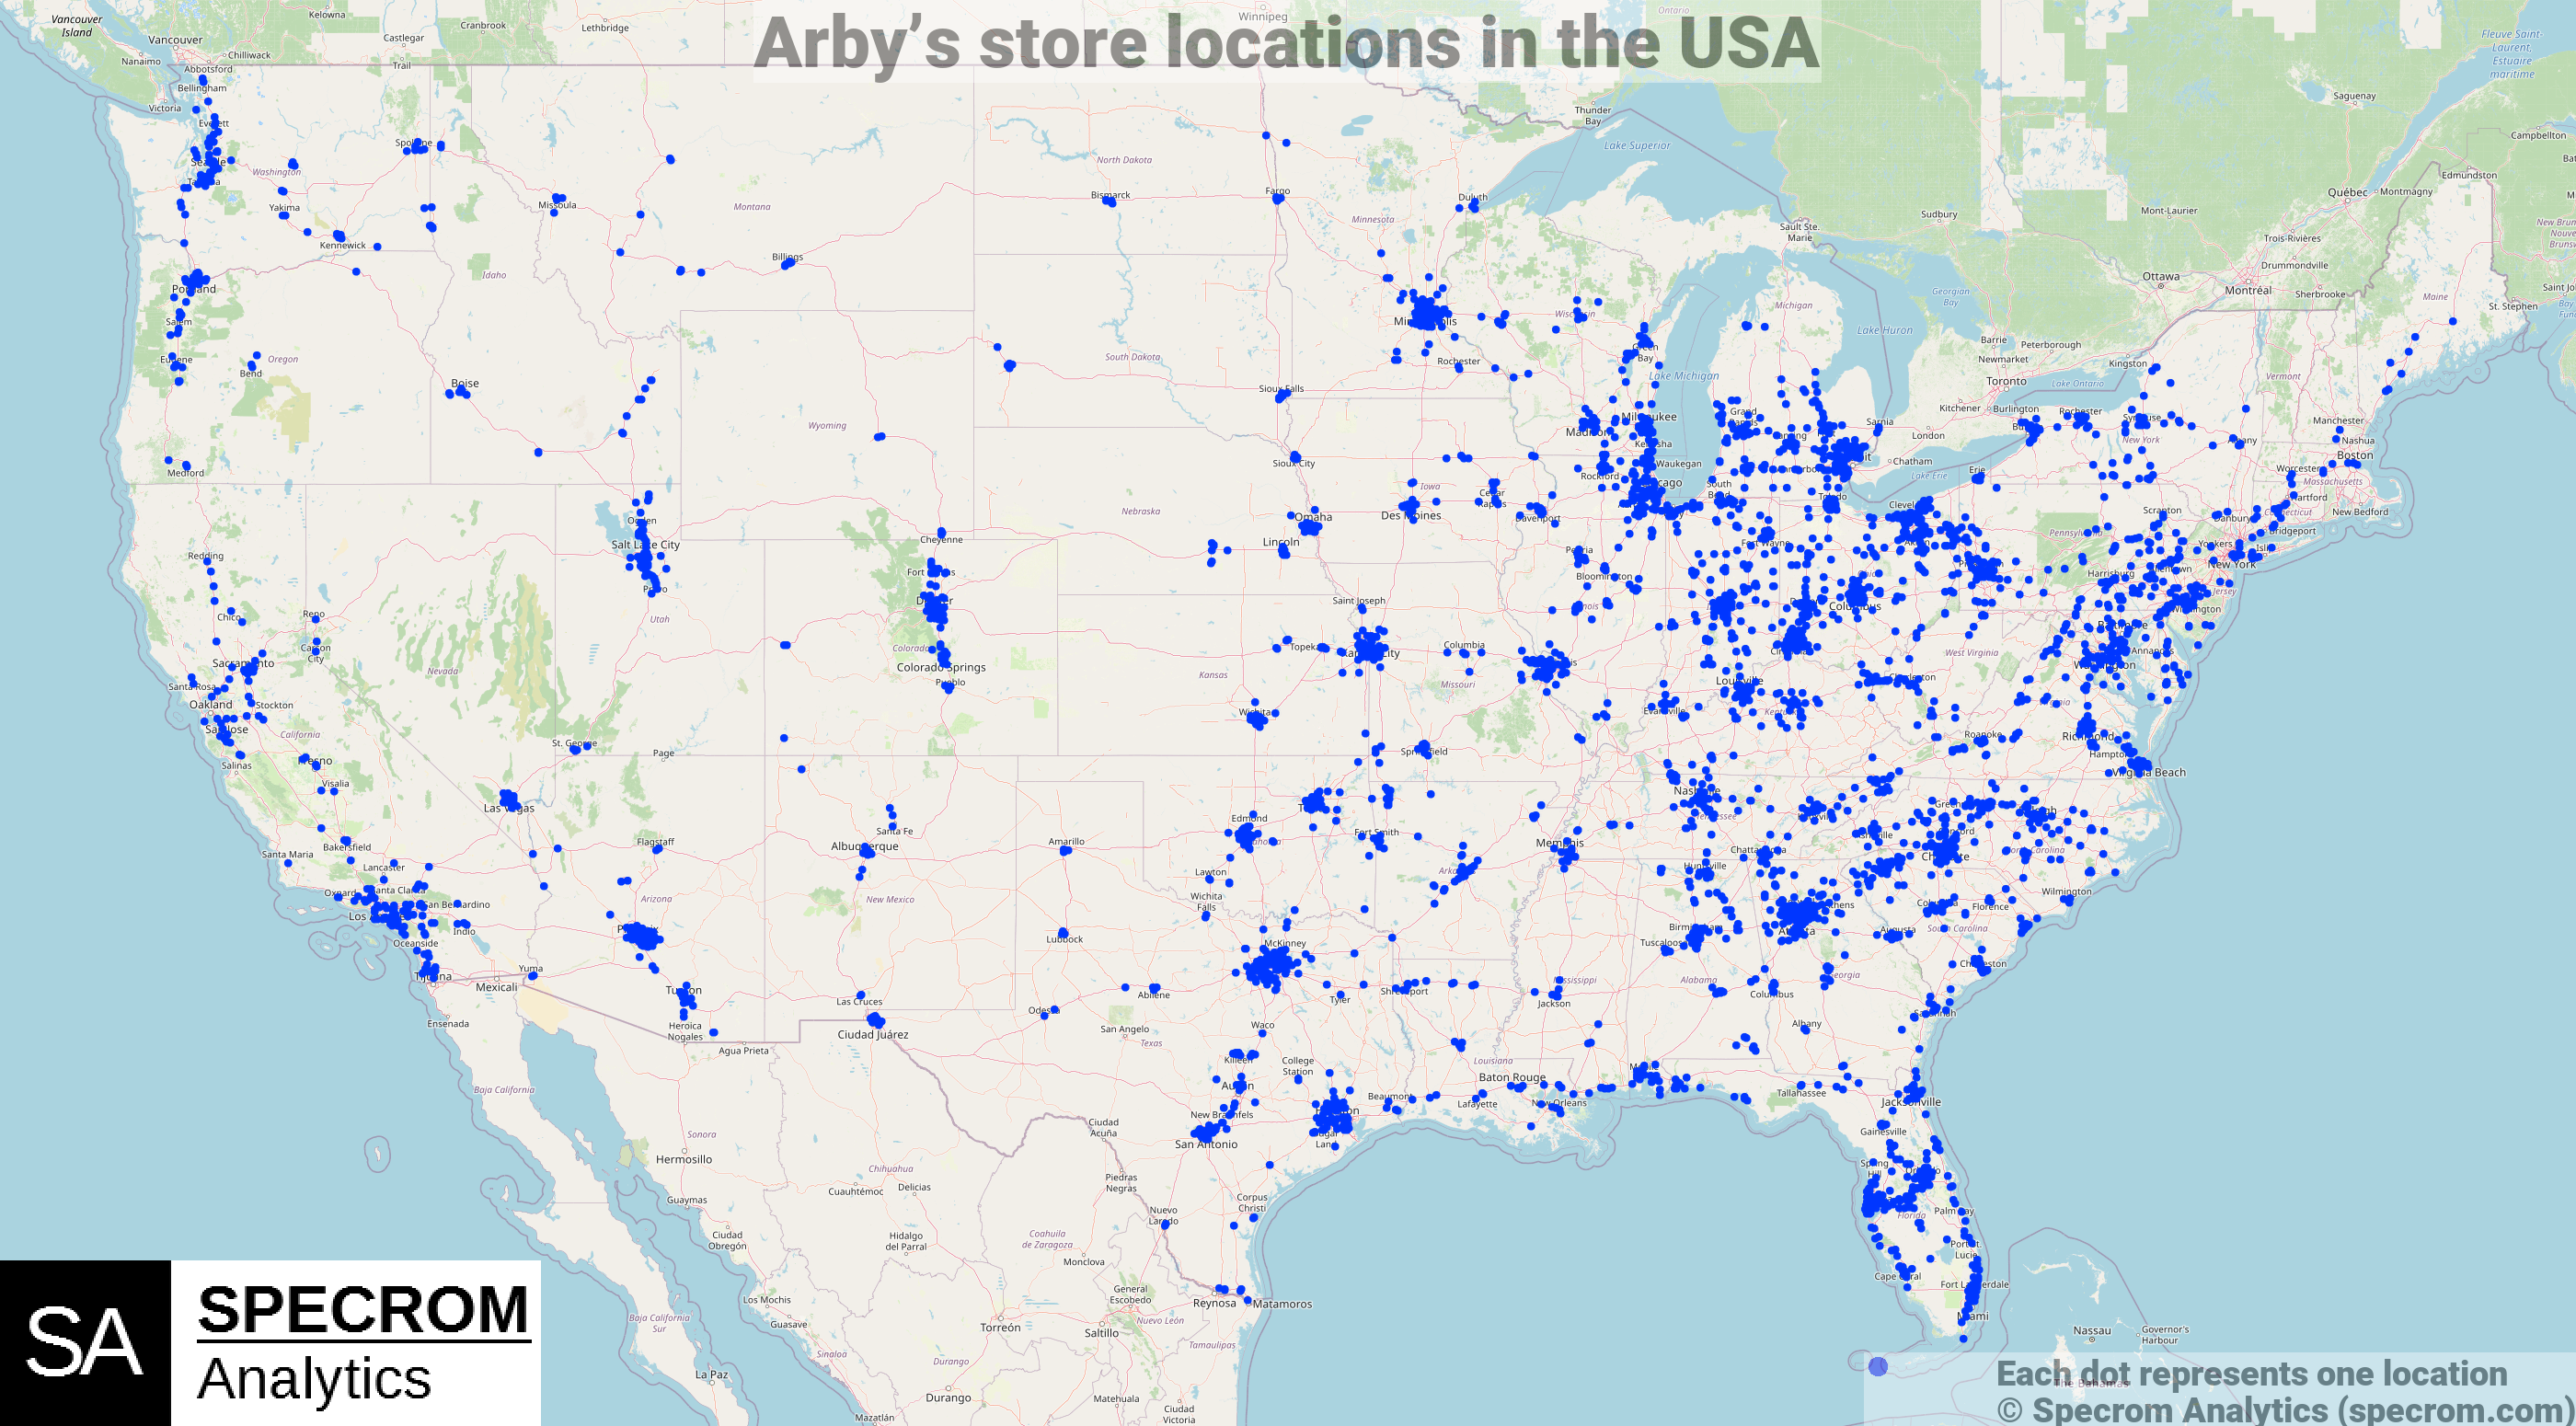 Arby's store locations in the USA